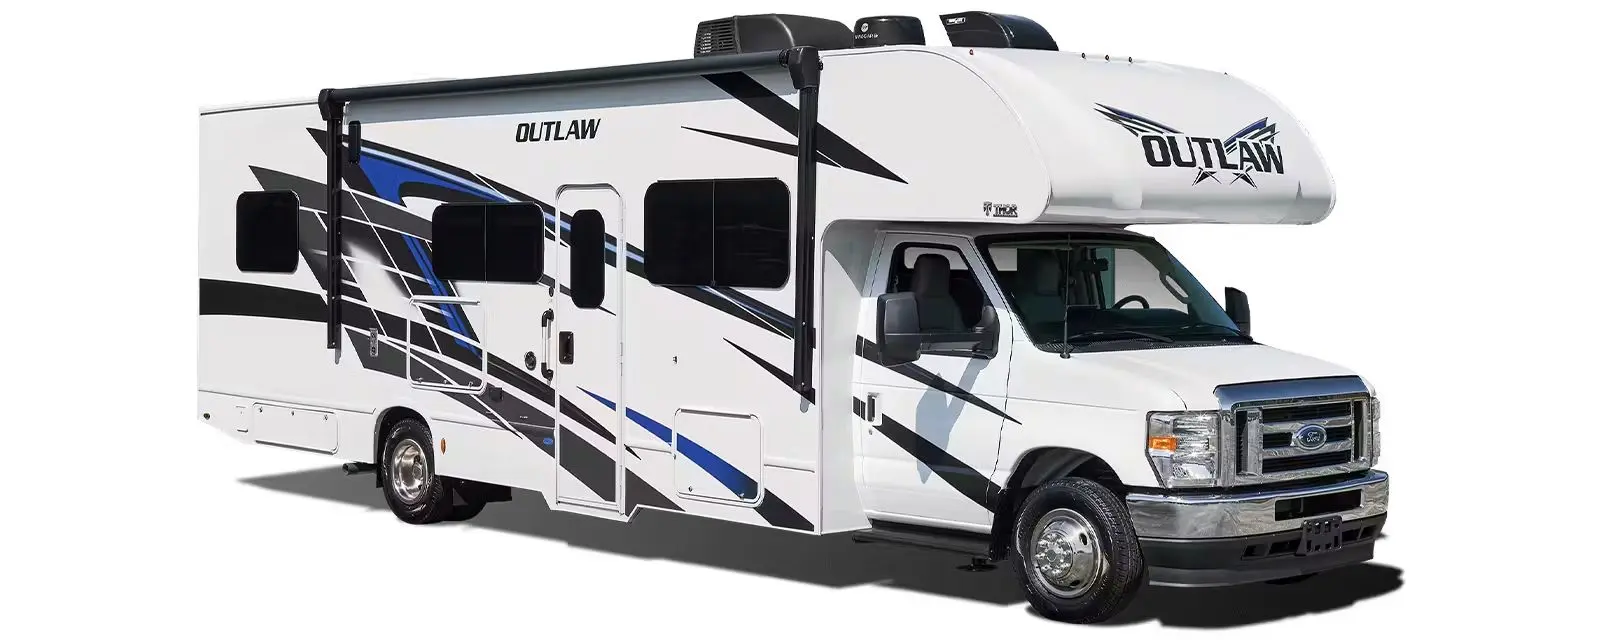 Outlaw Class C Motor Home